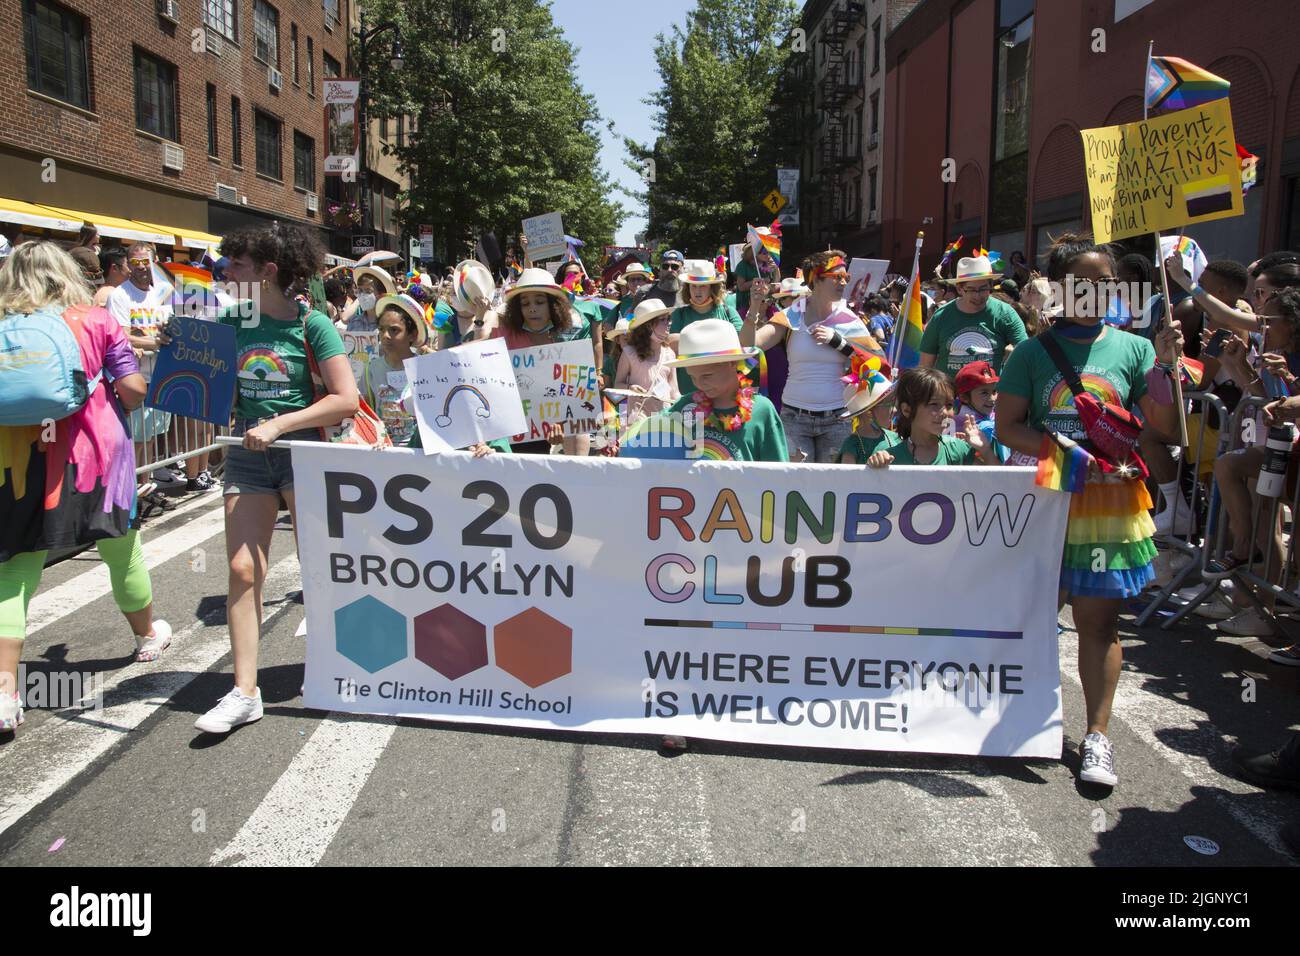 The annual Gay Pride Parade returns to march down 5th Avenue  and end up on Christopher Street in Greenwich Village after a 3 year break due to the Covid-19 pandemic.  PS 20 shows its support of the LGBTQ community. Stock Photo